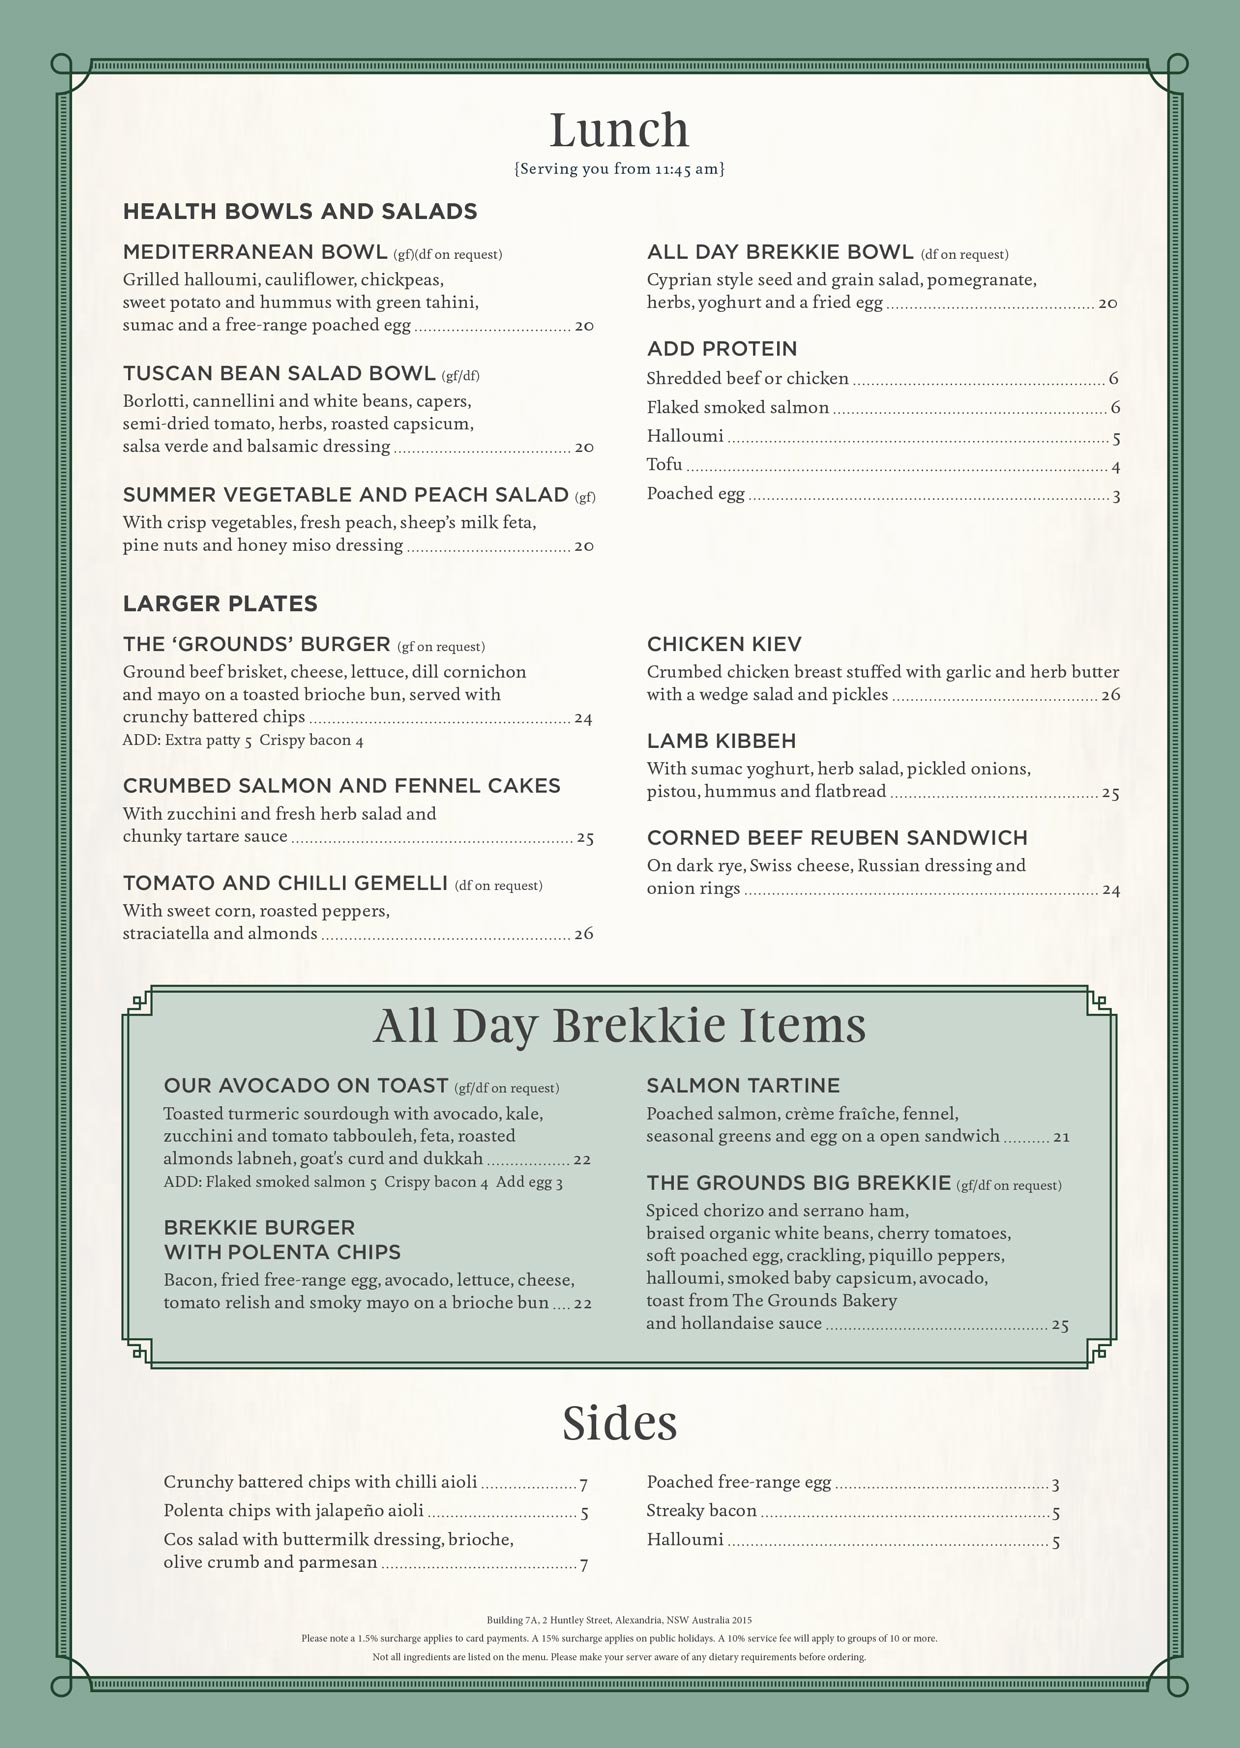 The Cafe Menu - Breakfast & Lunch | The Grounds of Alexandria